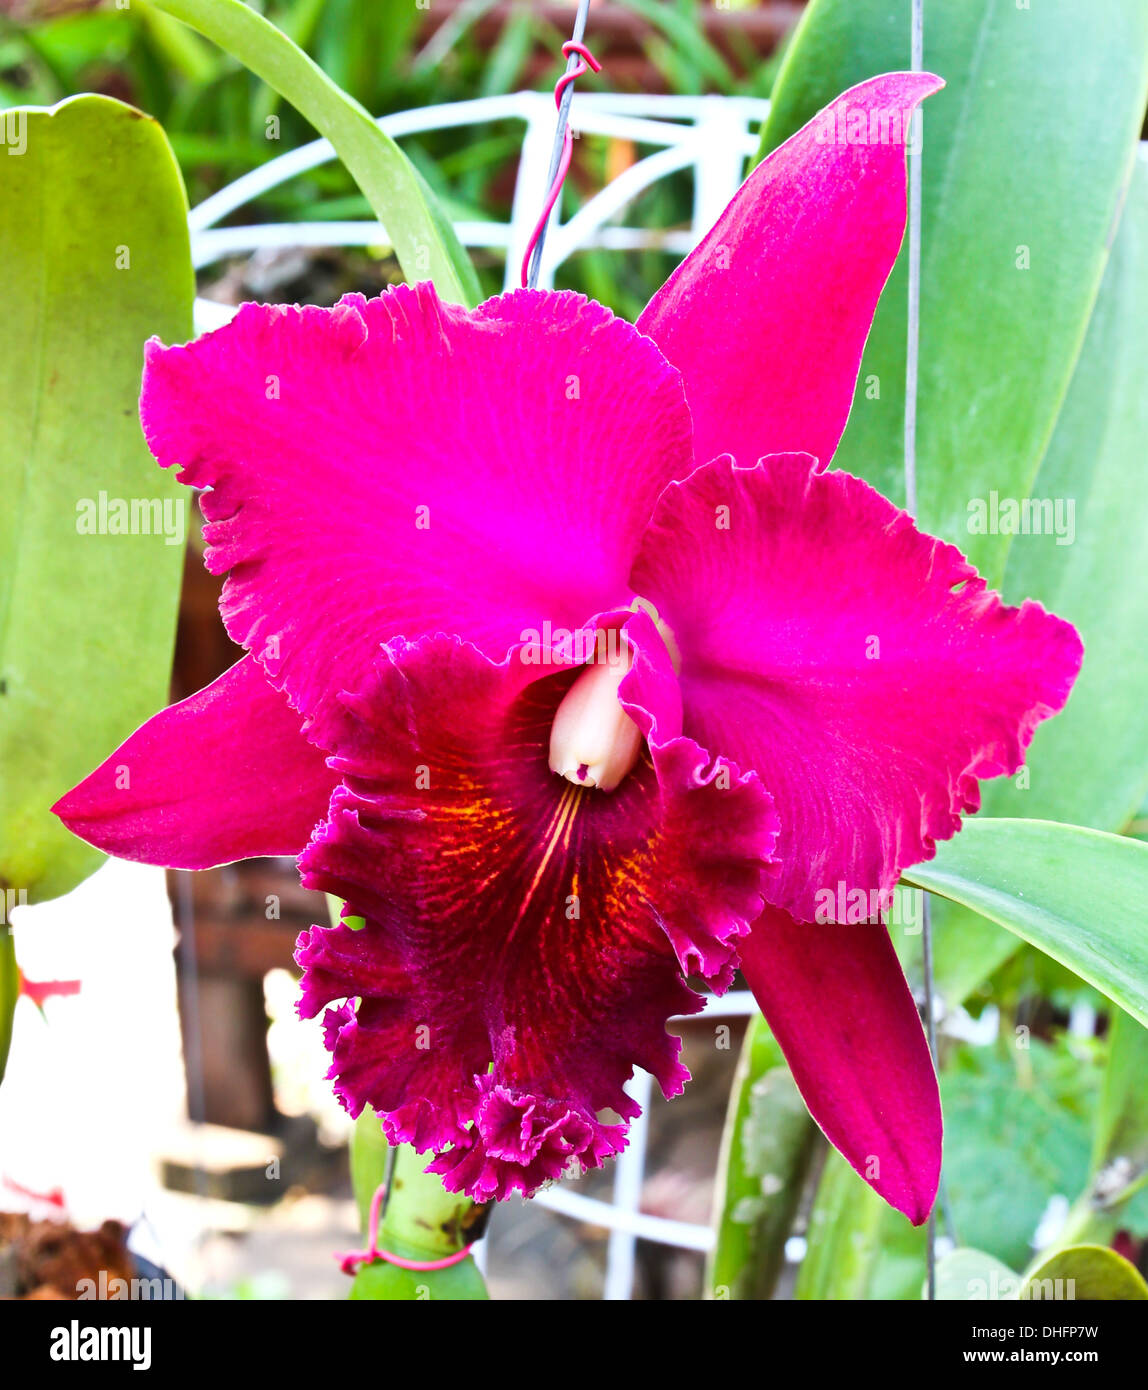 Violet cattleya orchid flower Stock Photo